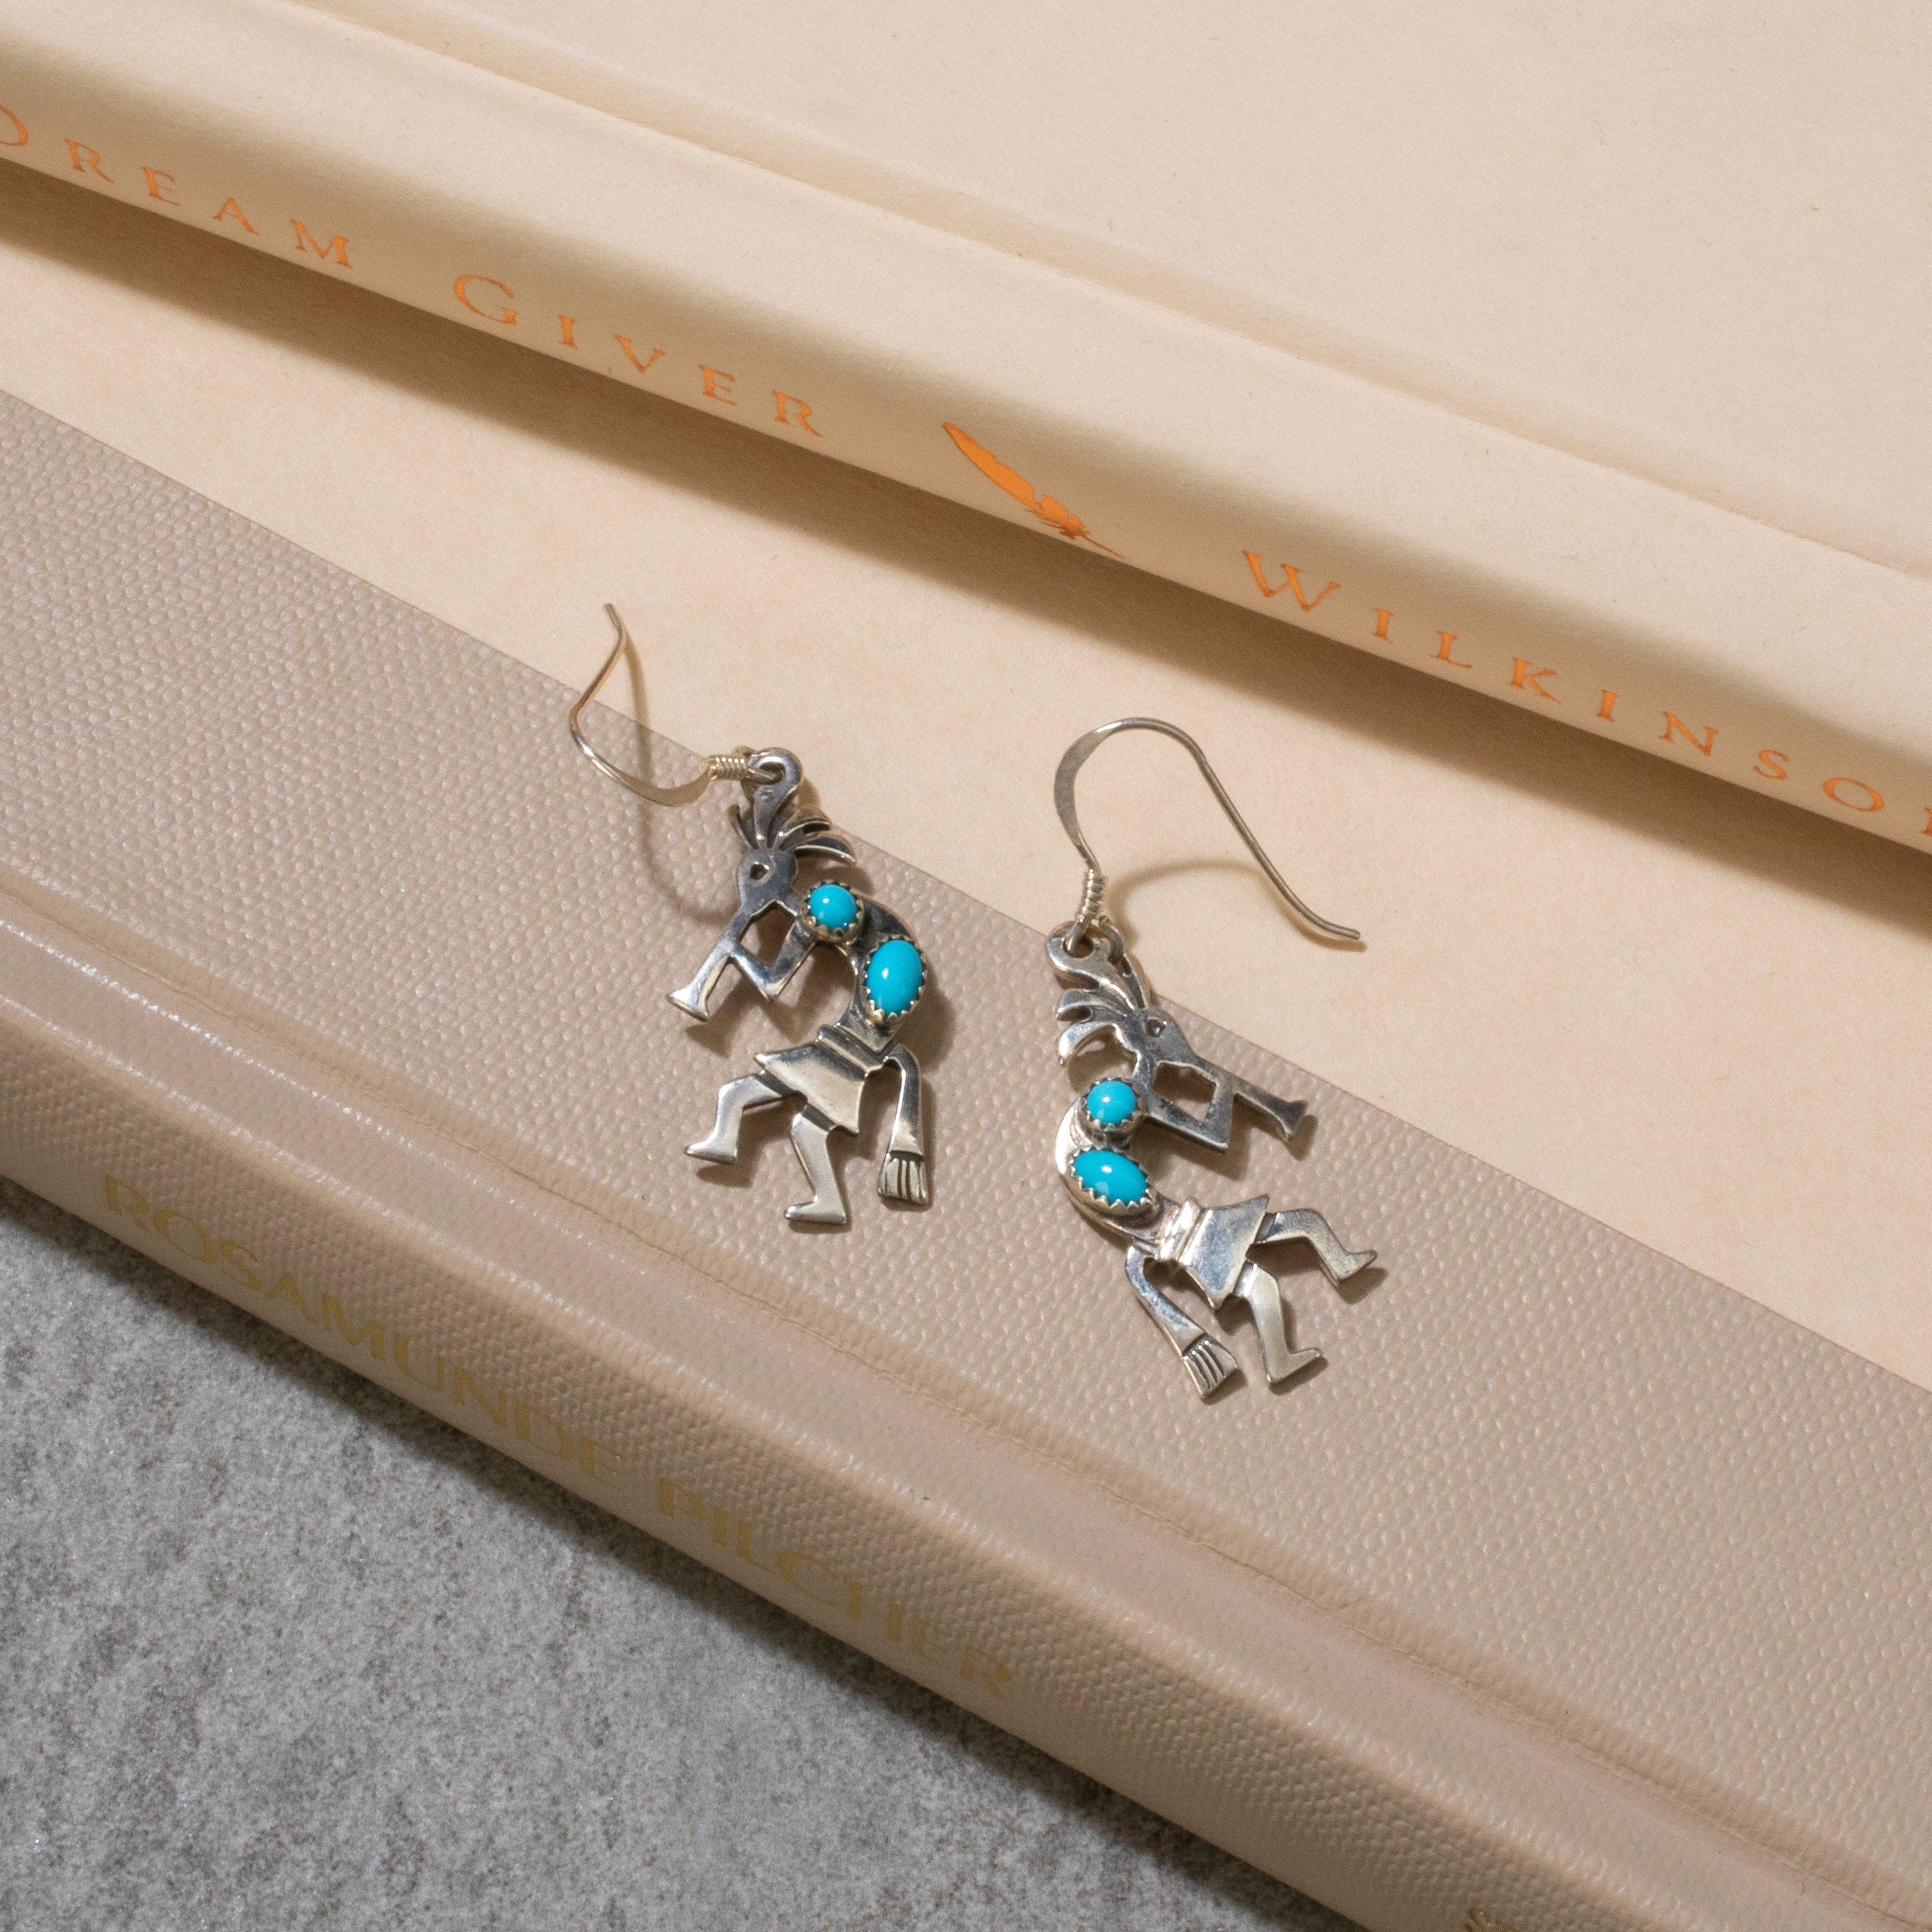 Kalifano Native American Jewelry Sleeping Beauty Turquoise Kokopelli Navajo USA Native American Made 925 Sterling Silver Earrings with French Hook NAE200.012